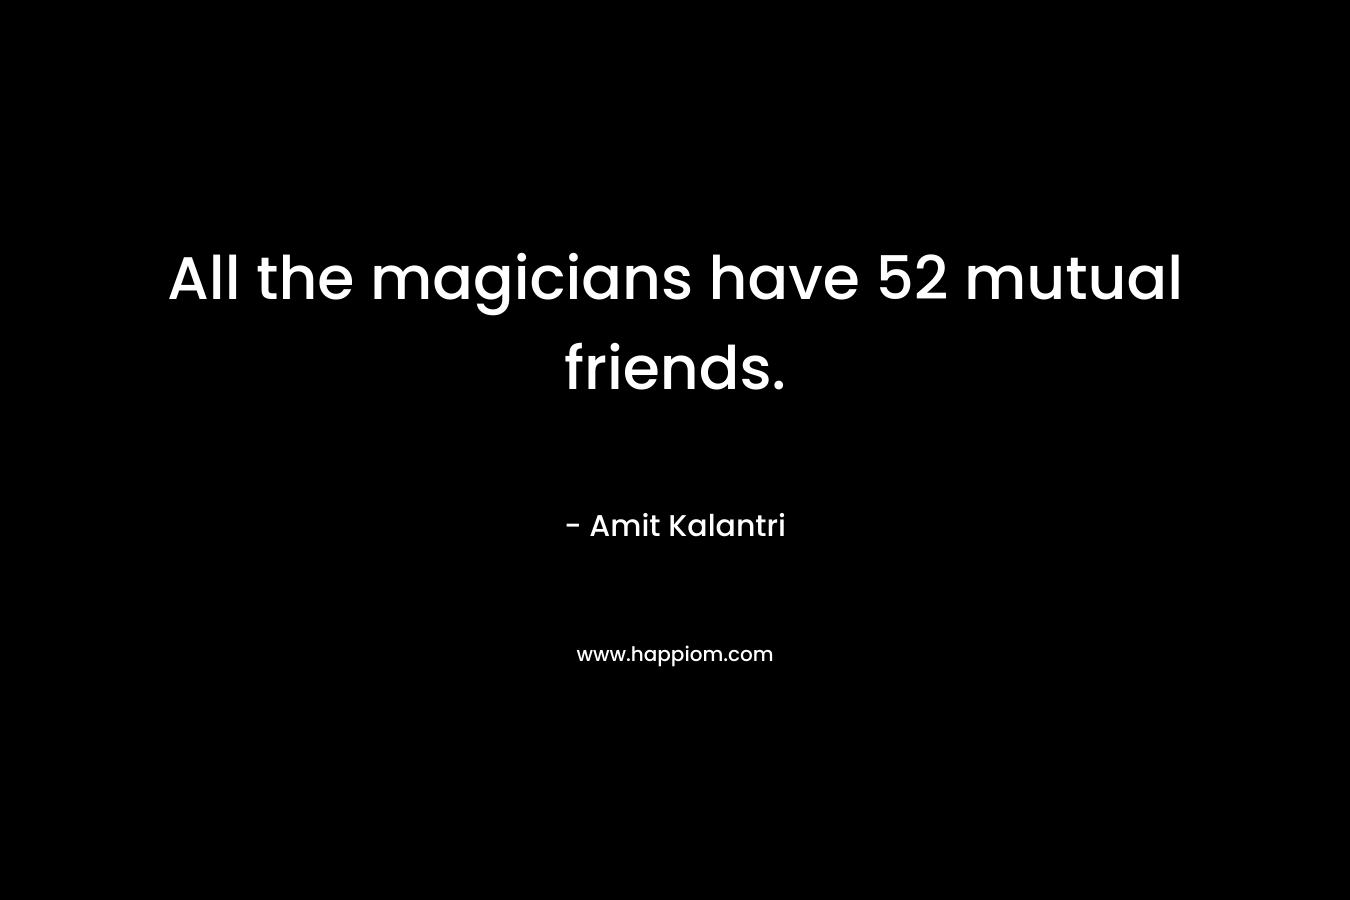 All the magicians have 52 mutual friends.